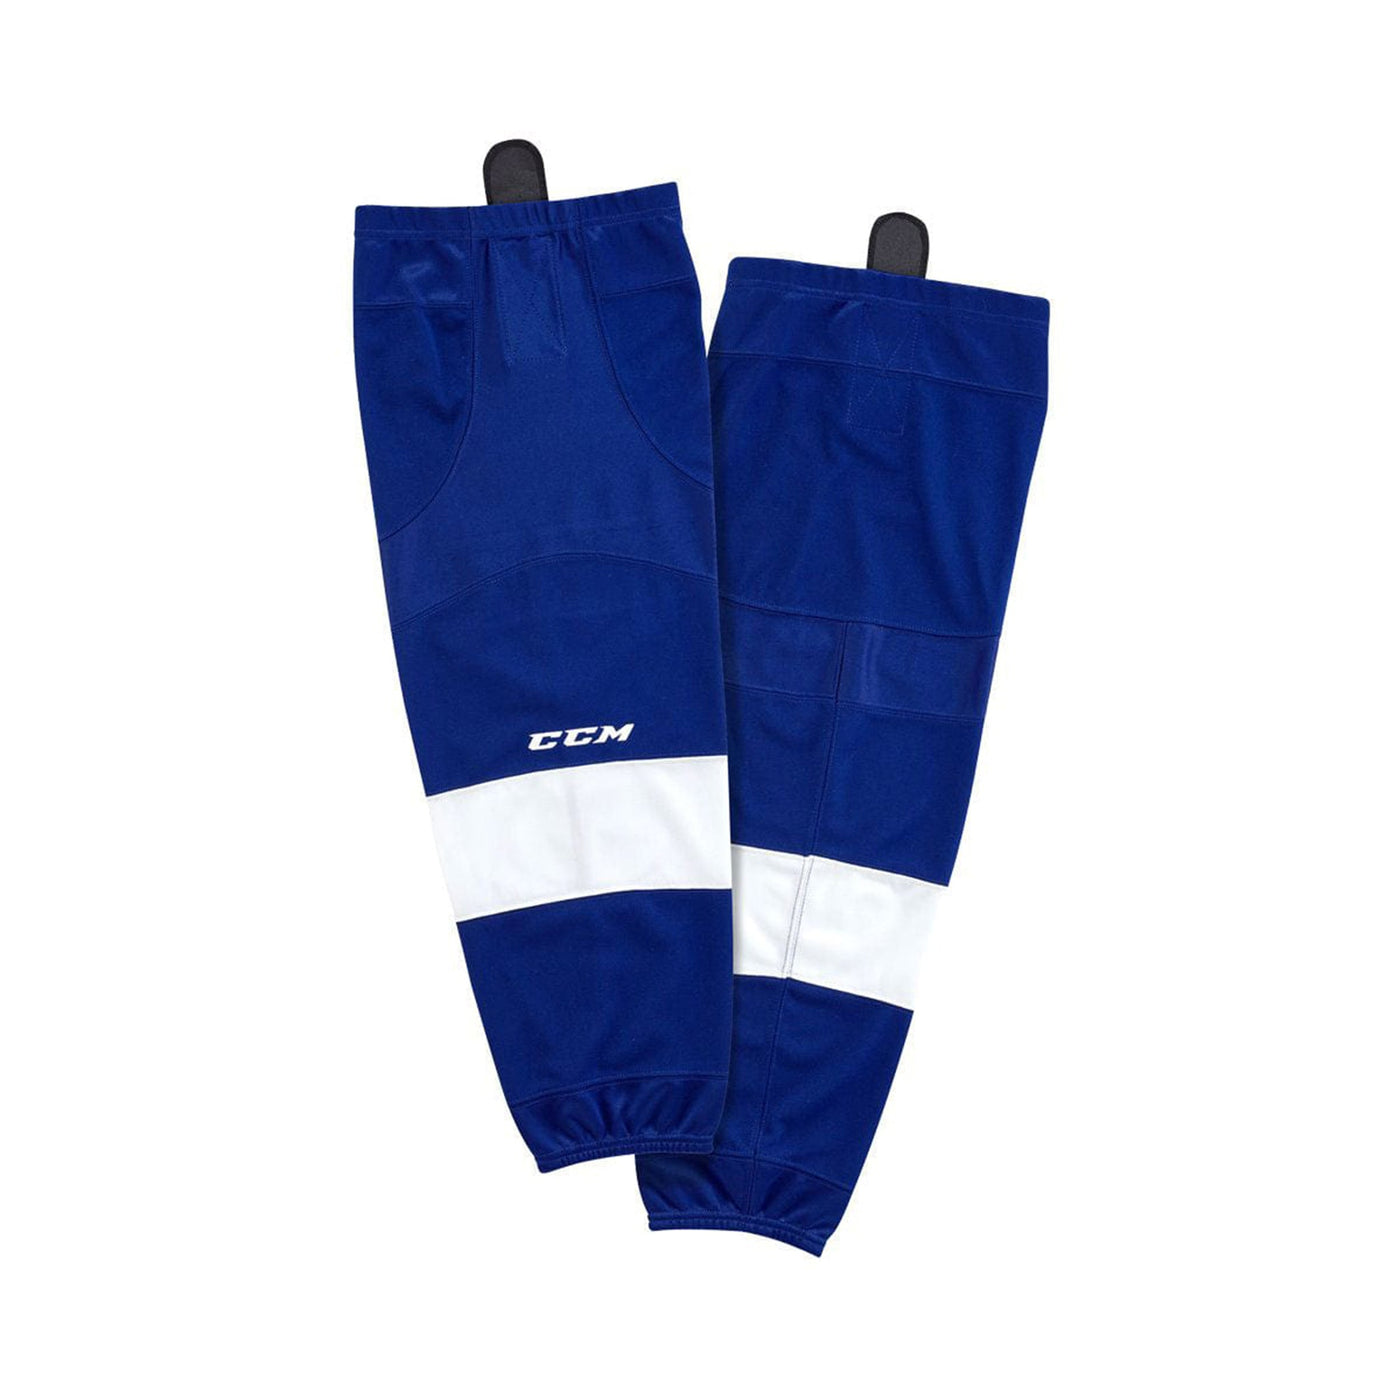 Tampa Bay Lightning Home CCM Quicklite 8000 Hockey Socks - The Hockey Shop Source For Sports